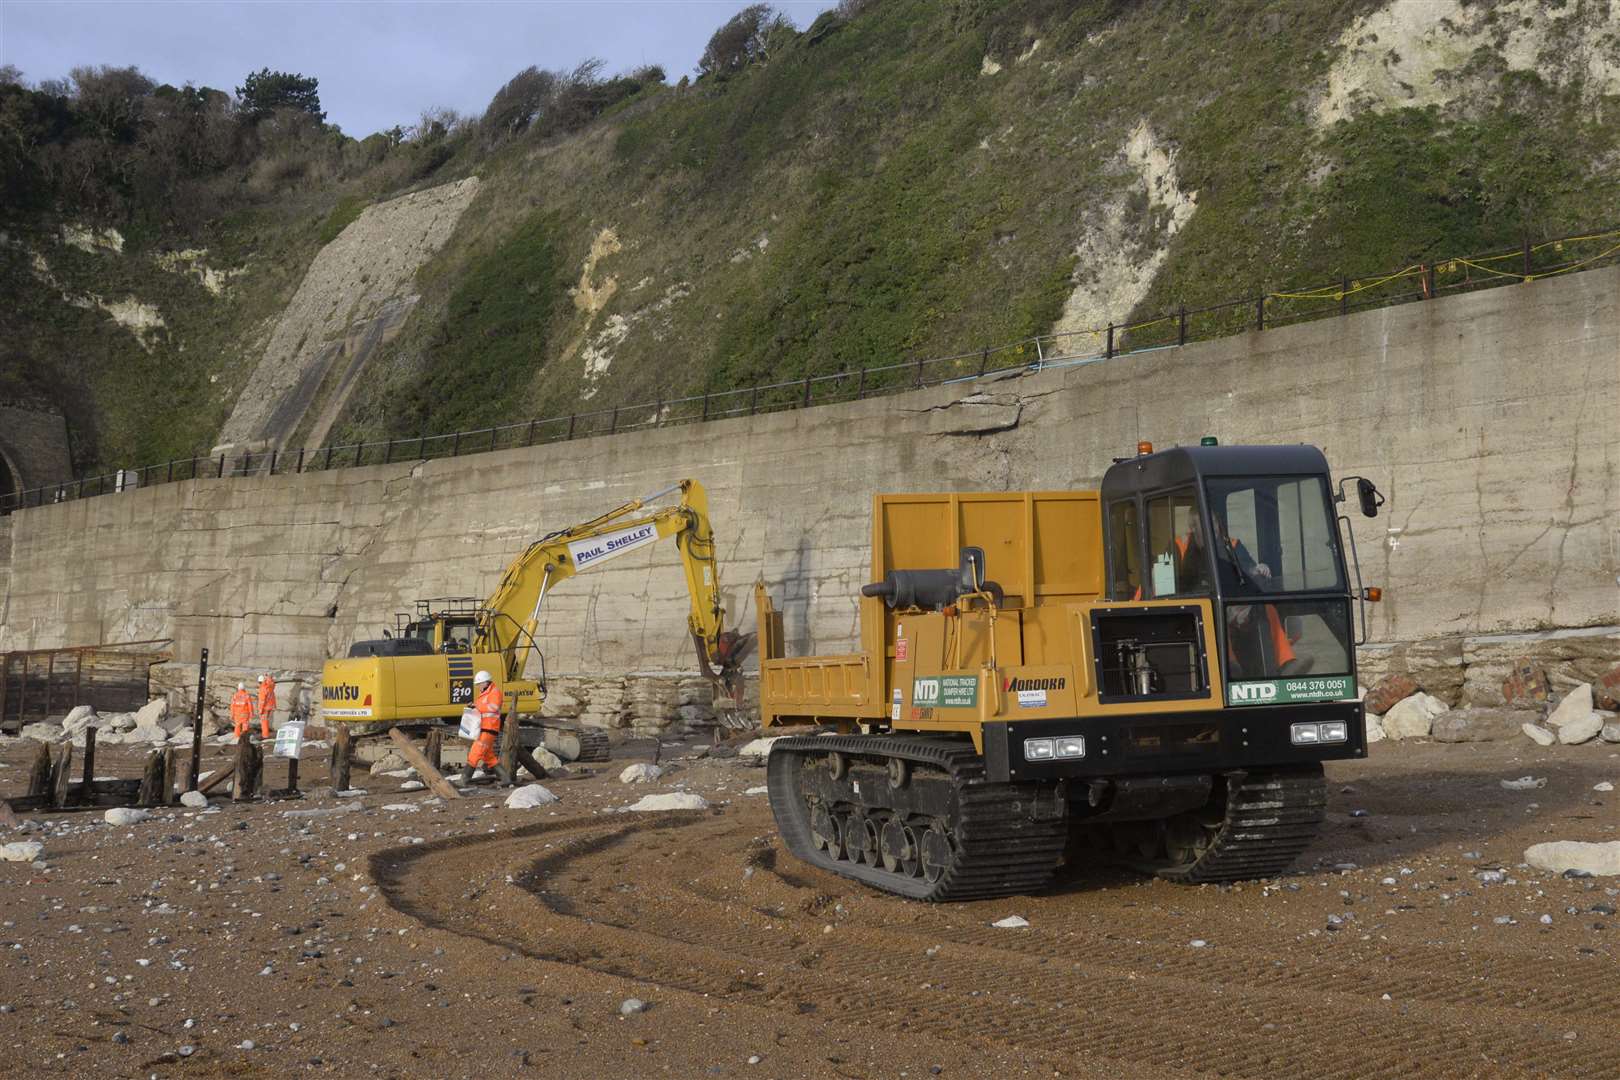 Repair work is underway on the damaged sea wall and railway embankment near Shakespeare Cliff tunnel between Dover and Folkestone